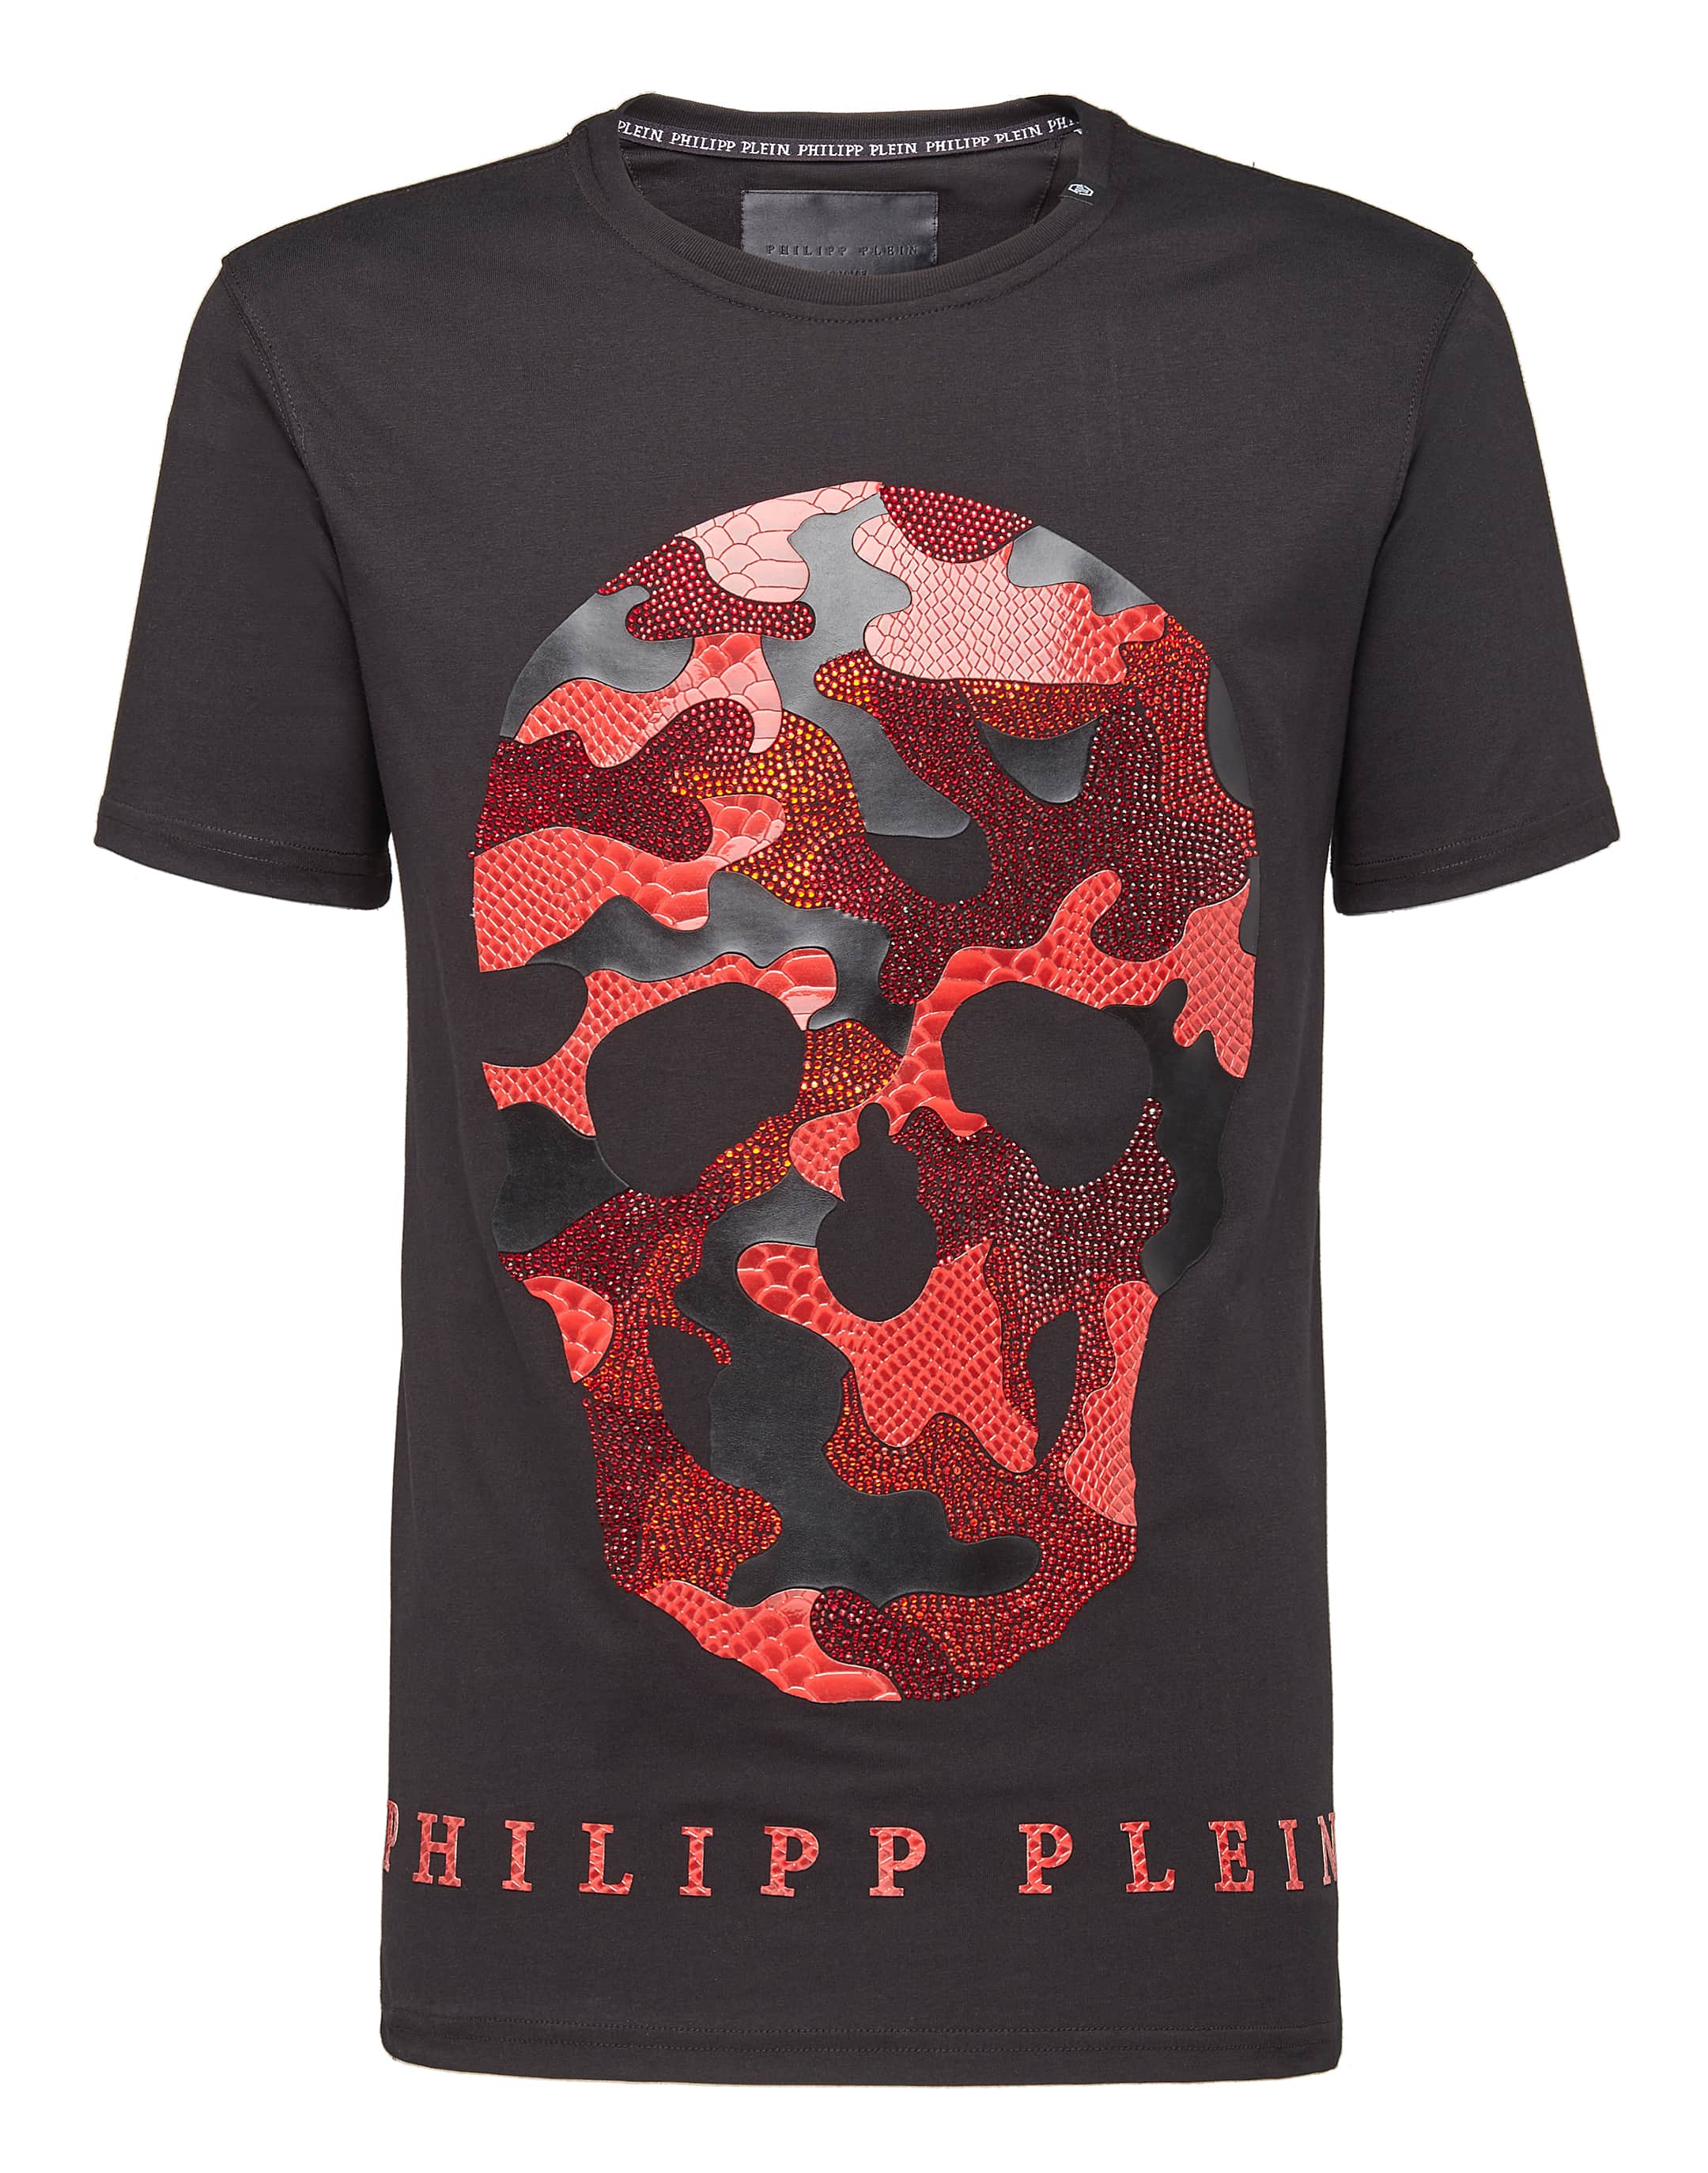 T-shirt Round Neck SS "Wasting" | Philipp Plein Outlet